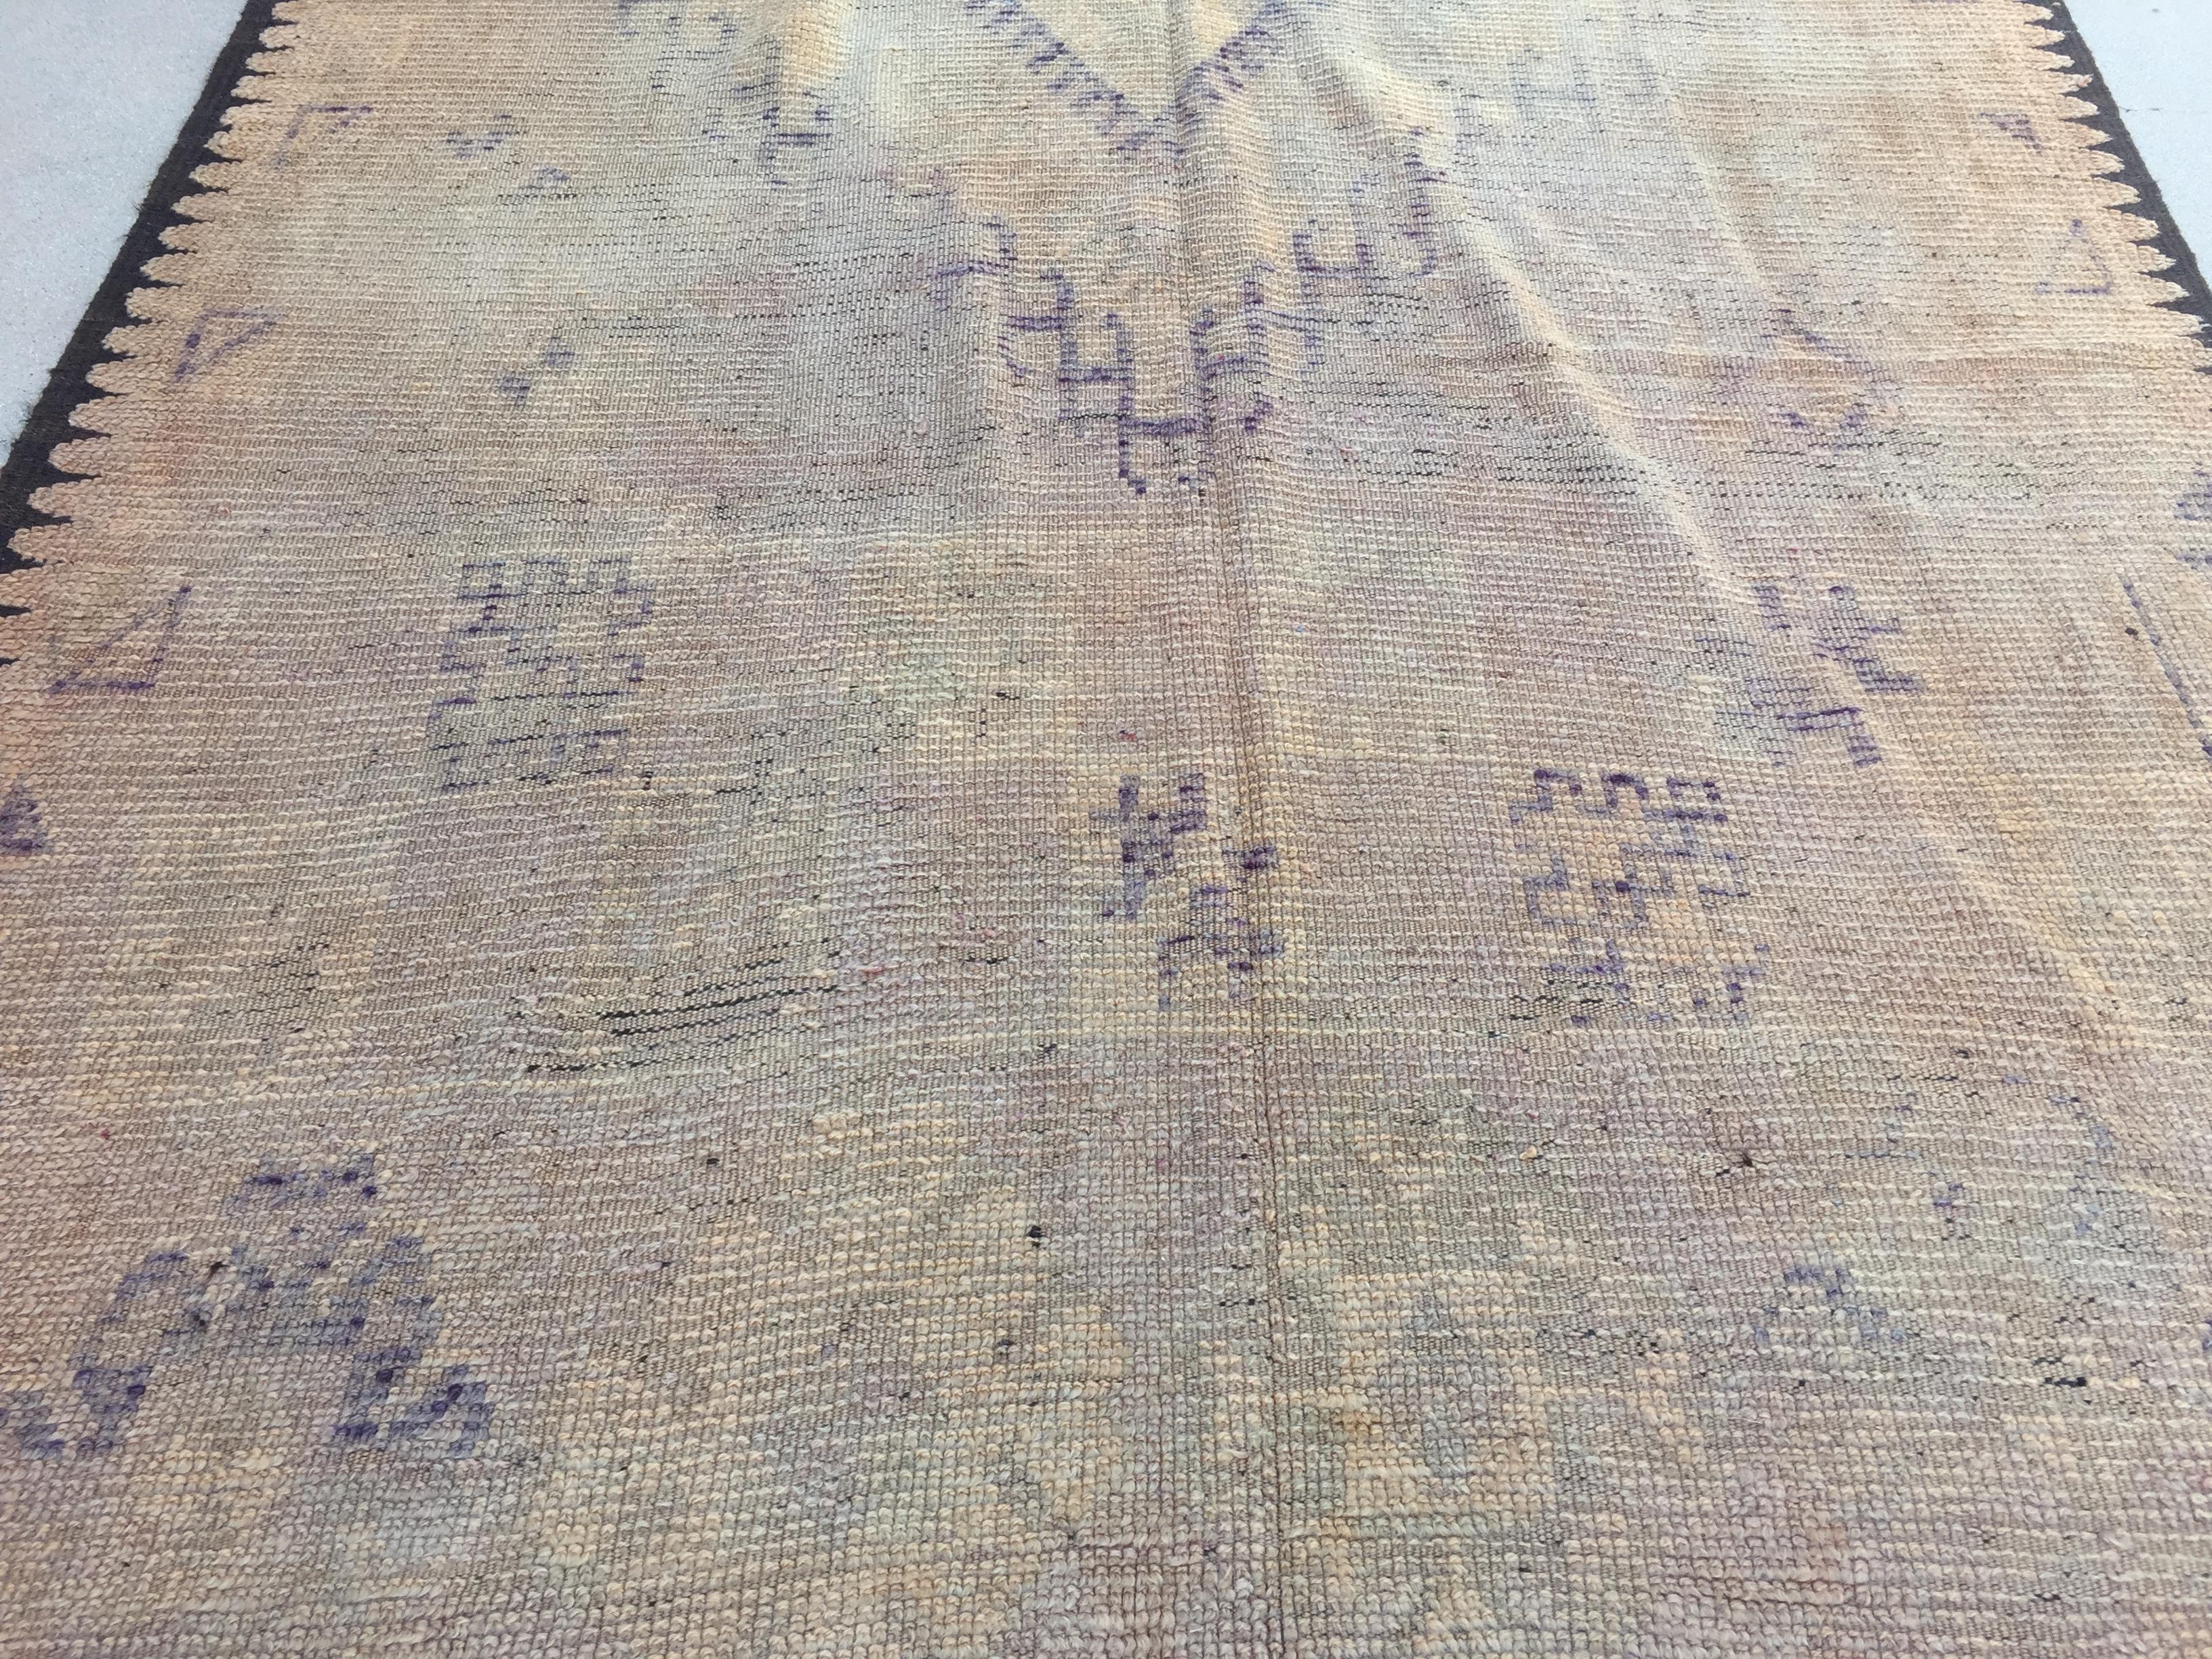 1960s Moroccan Vintage Berber Tribal Rug In Good Condition For Sale In North Hollywood, CA